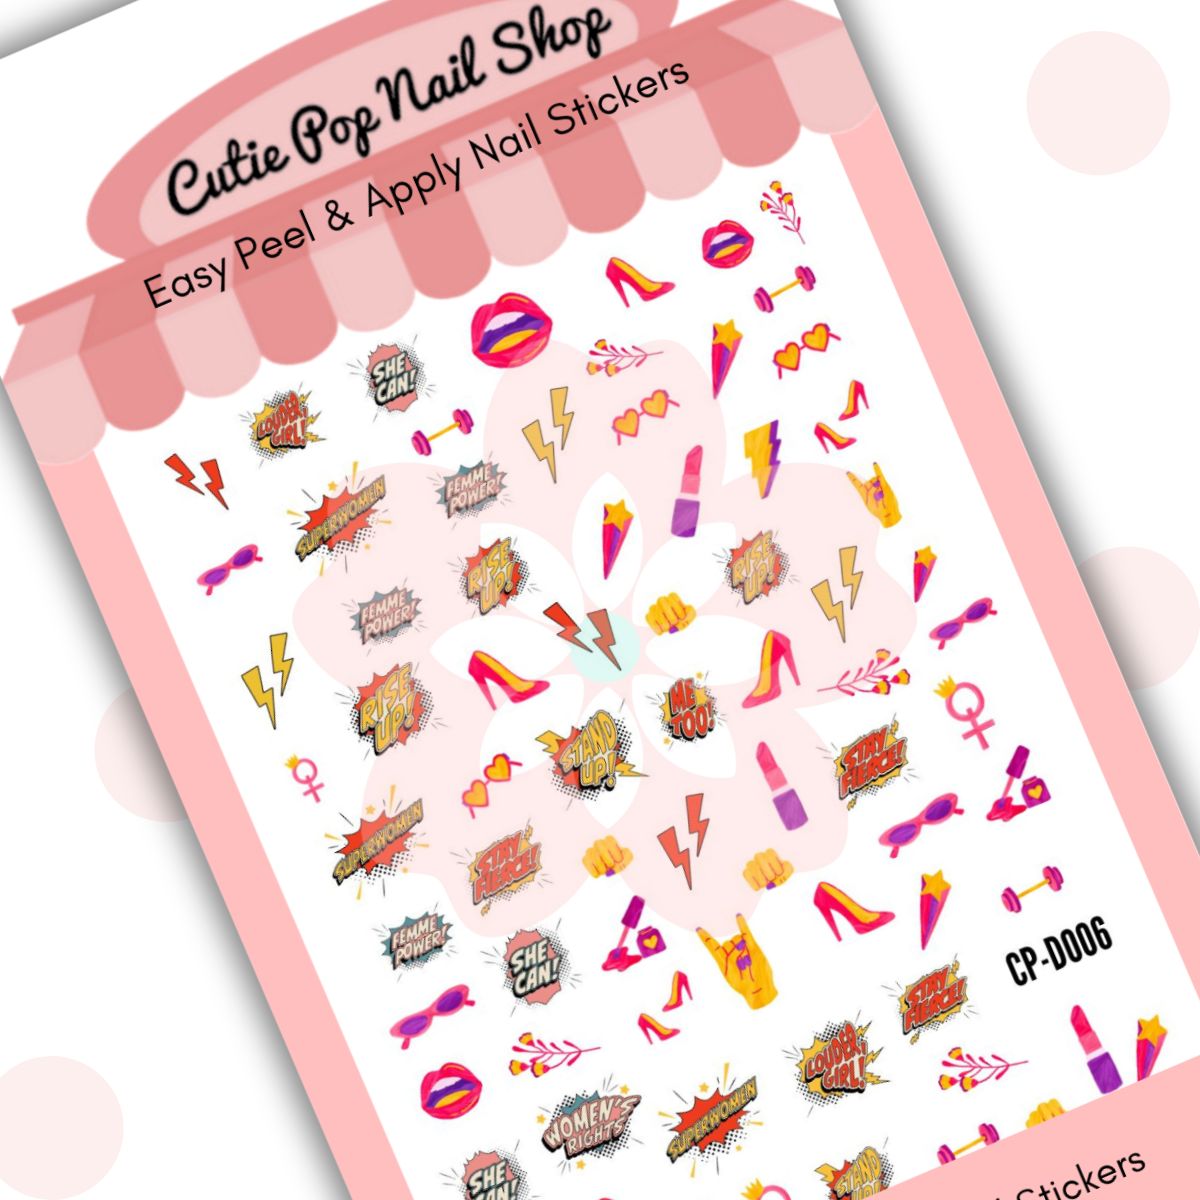 This image showcases Cutie Pop Nail Shop’s She Can! nail decals against a white background with a Cutie Pop Nail Shop logo and watermark. These neon red, pink, yellow, and purple designs include images of fists, hands in a sign of solidarity, lips, glasses, lip polish, stilettos, the female sex symbol, lipsticks, thunderbolts, stars, flowers, and gym weights, as well as messages including ‘She Can!’, ‘’Stay Fierce!’, ‘Women’s Rights’, ‘Superwomen’, Louder, Girl!’, ‘Femme Power!’, and ‘Rise Up!’.